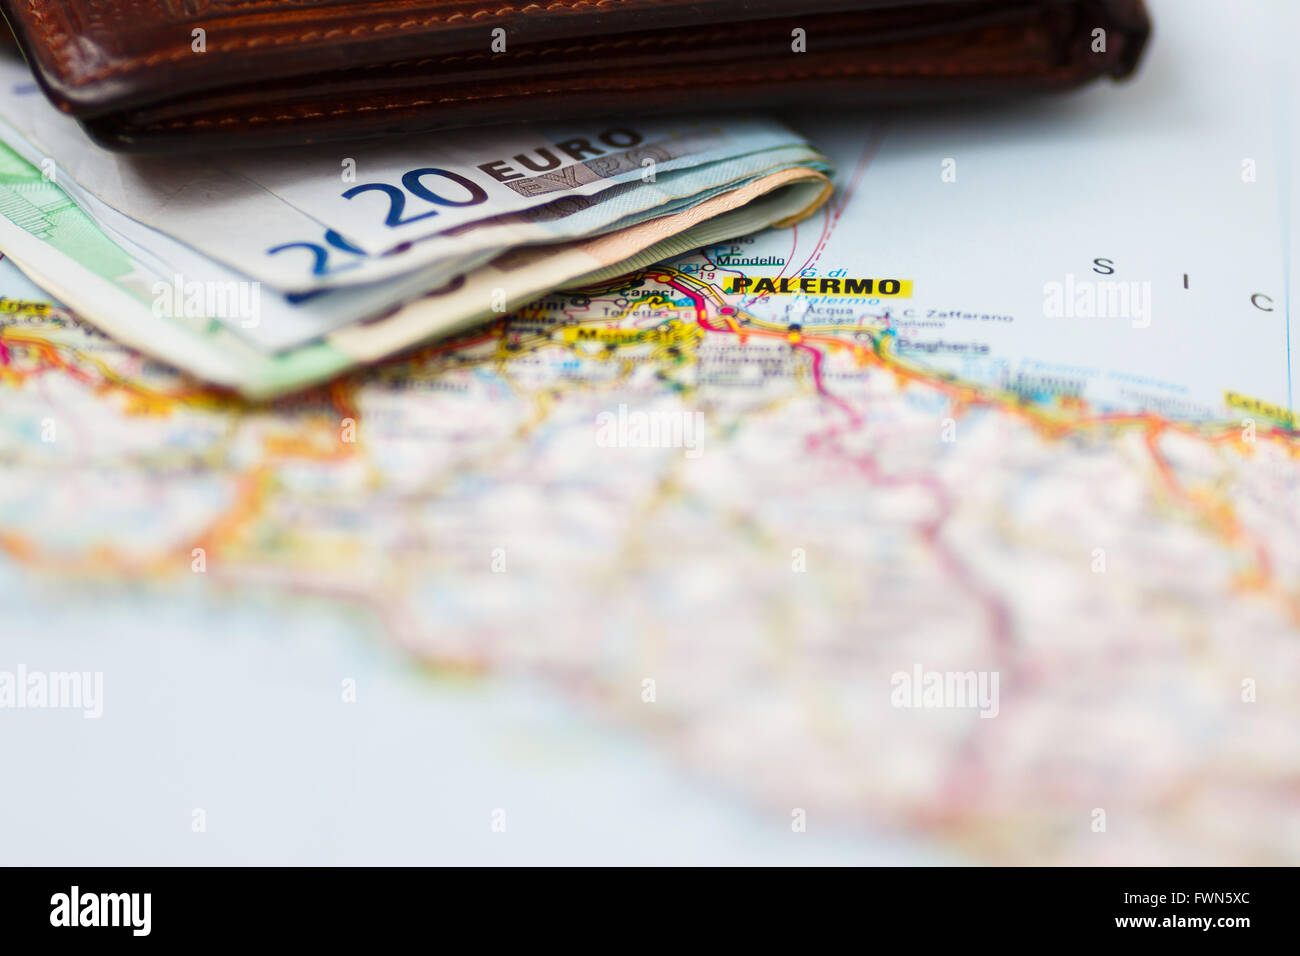 Euro banknotes inside wallet on a geographical map of Palermo, Italy Stock Photo